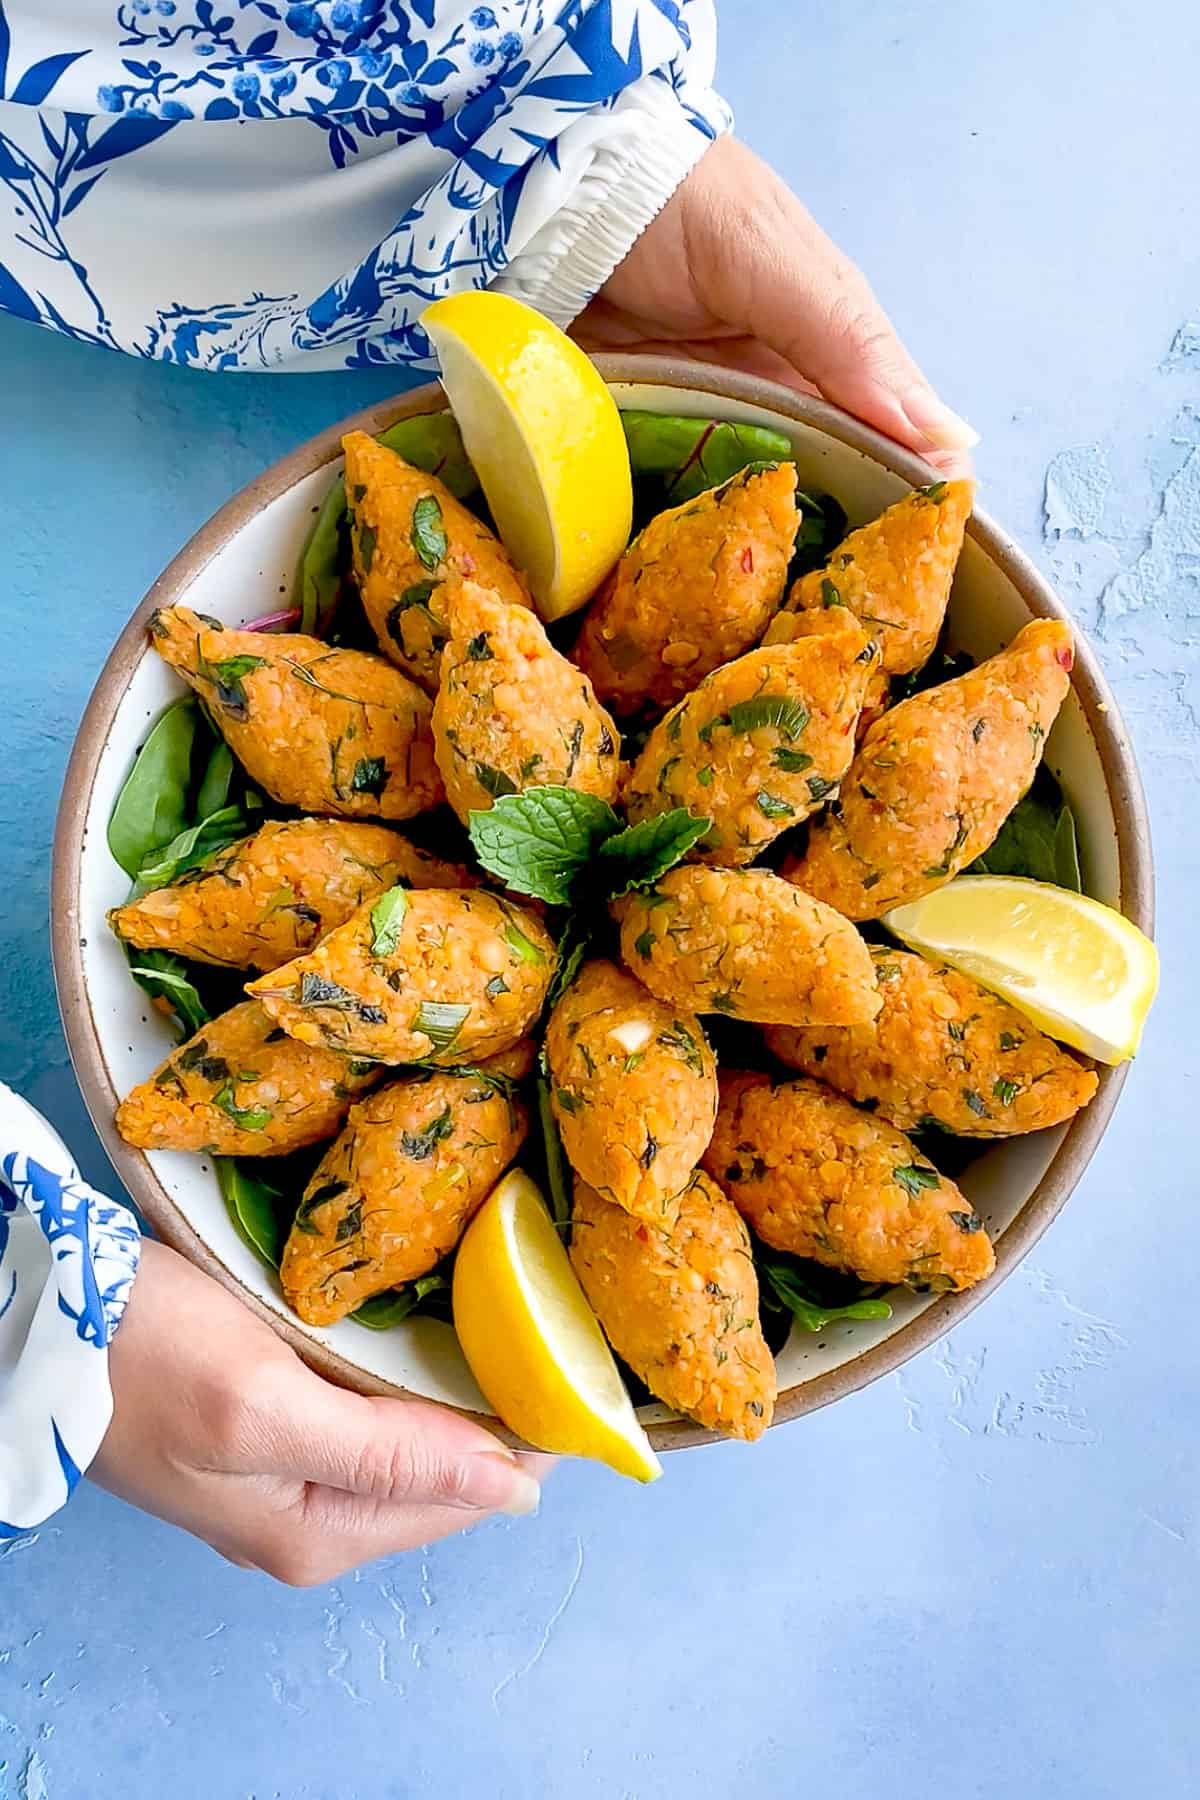 Turkish Lentil Balls on a plate, held by a woman